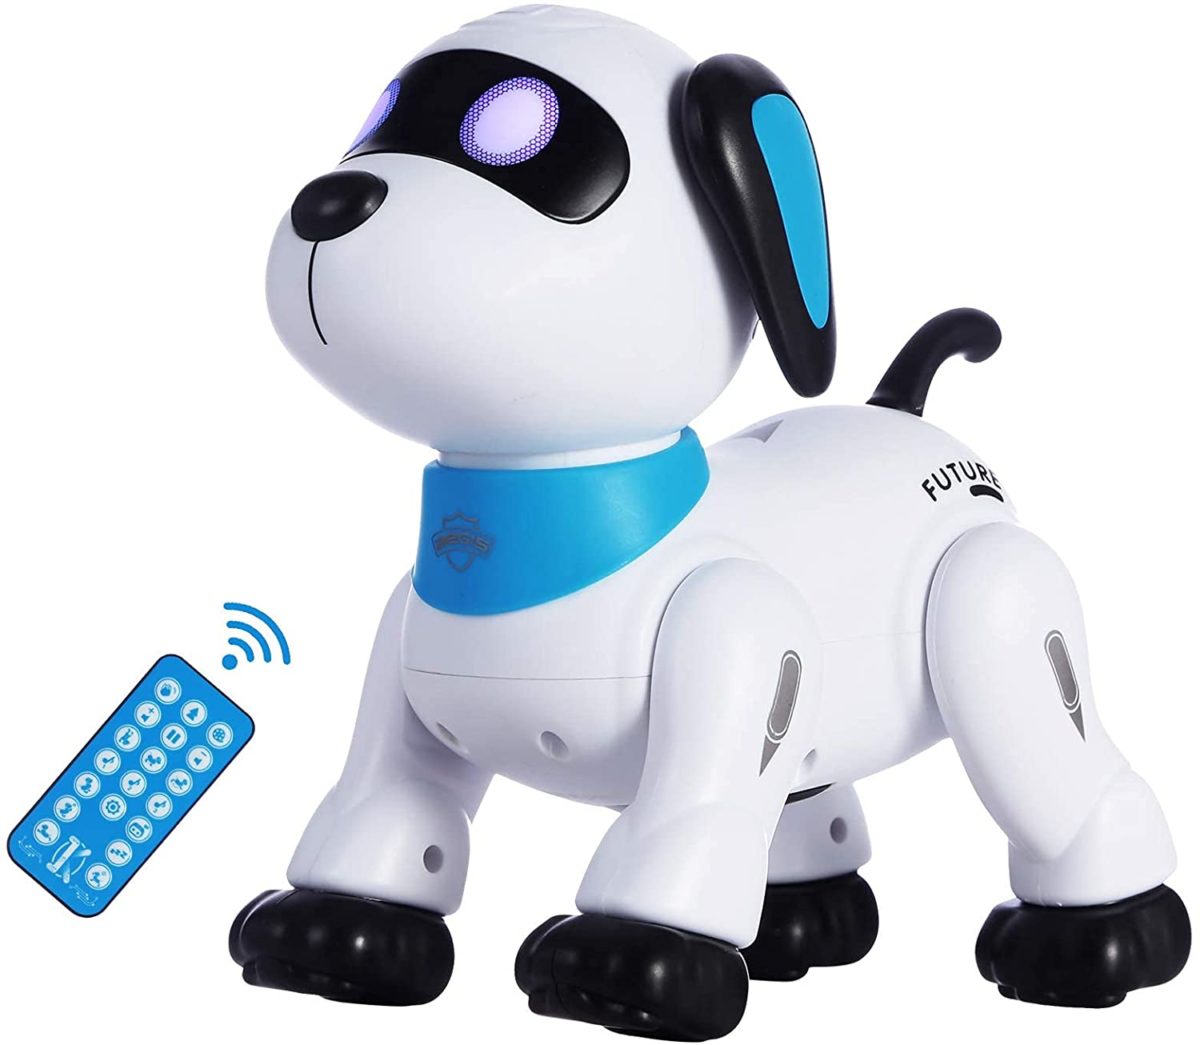 fun robot dog toys for kids who want a little buddy